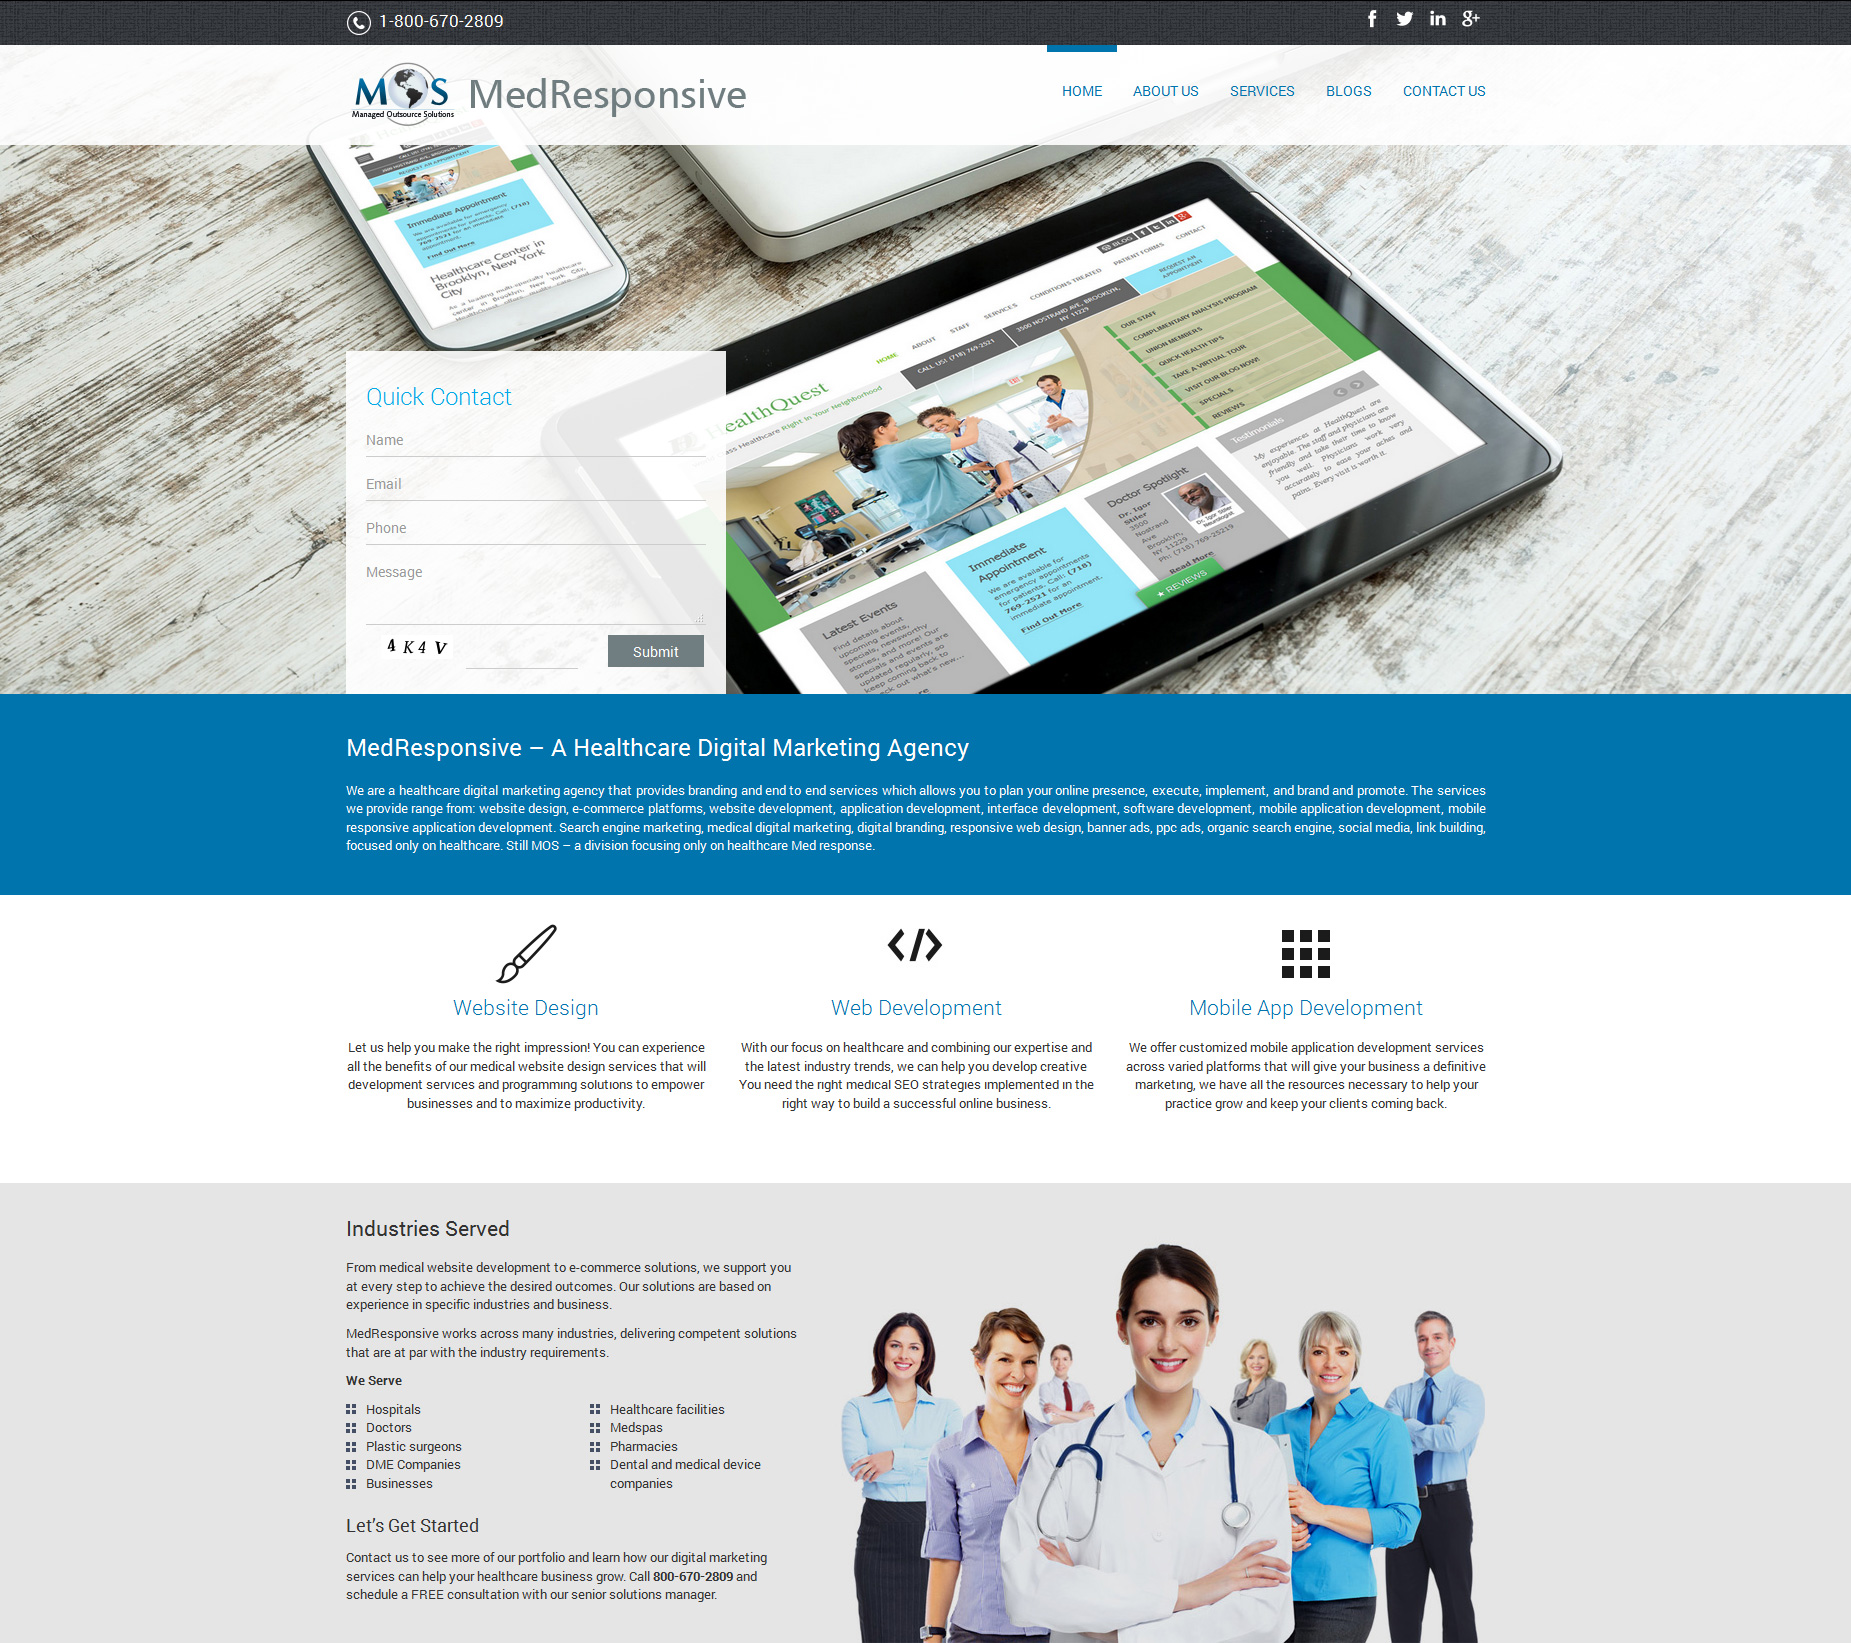 Managed Outsource Solutions Launches Its New MedResponsive Website